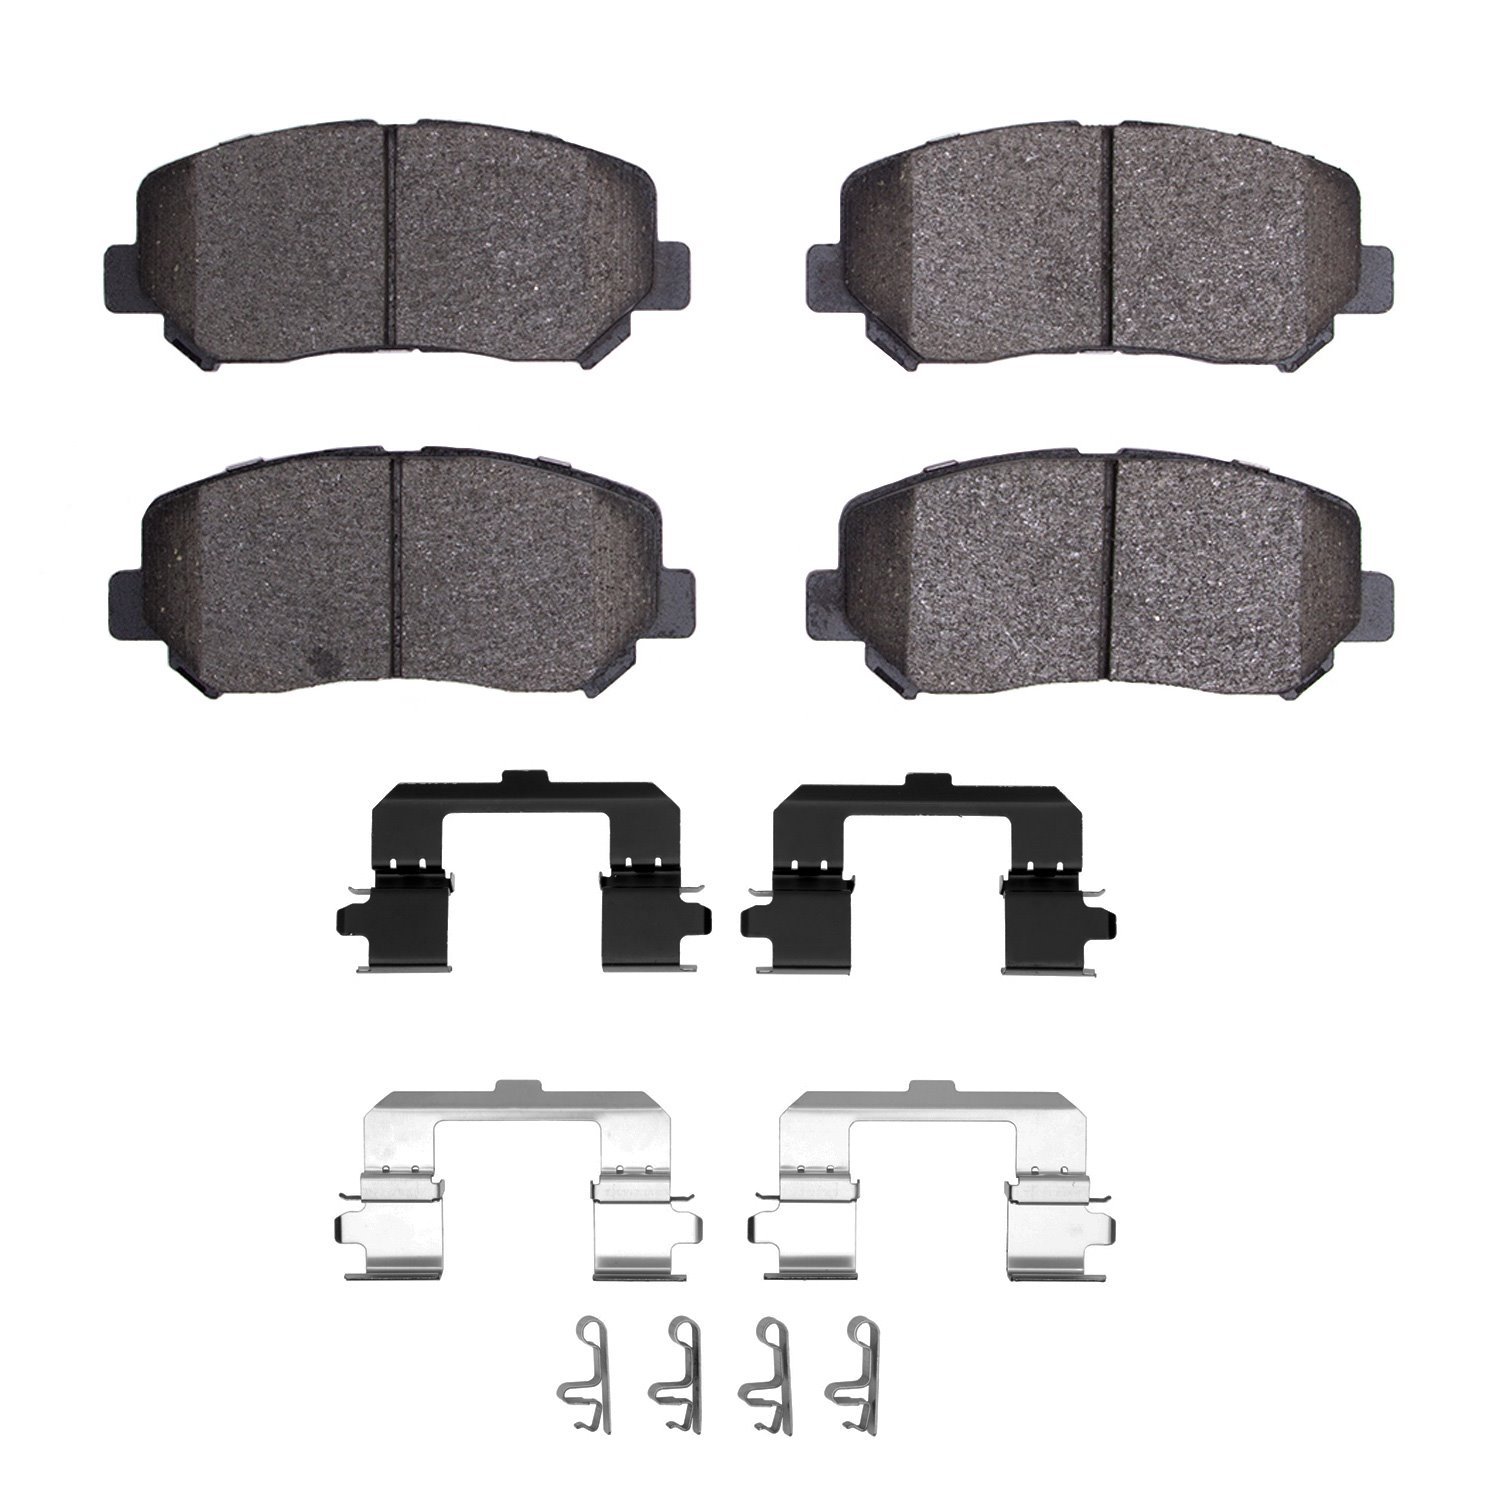 1310-1623-01 3000-Series Ceramic Brake Pads & Hardware Kit, Fits Select Ford/Lincoln/Mercury/Mazda, Position: Front